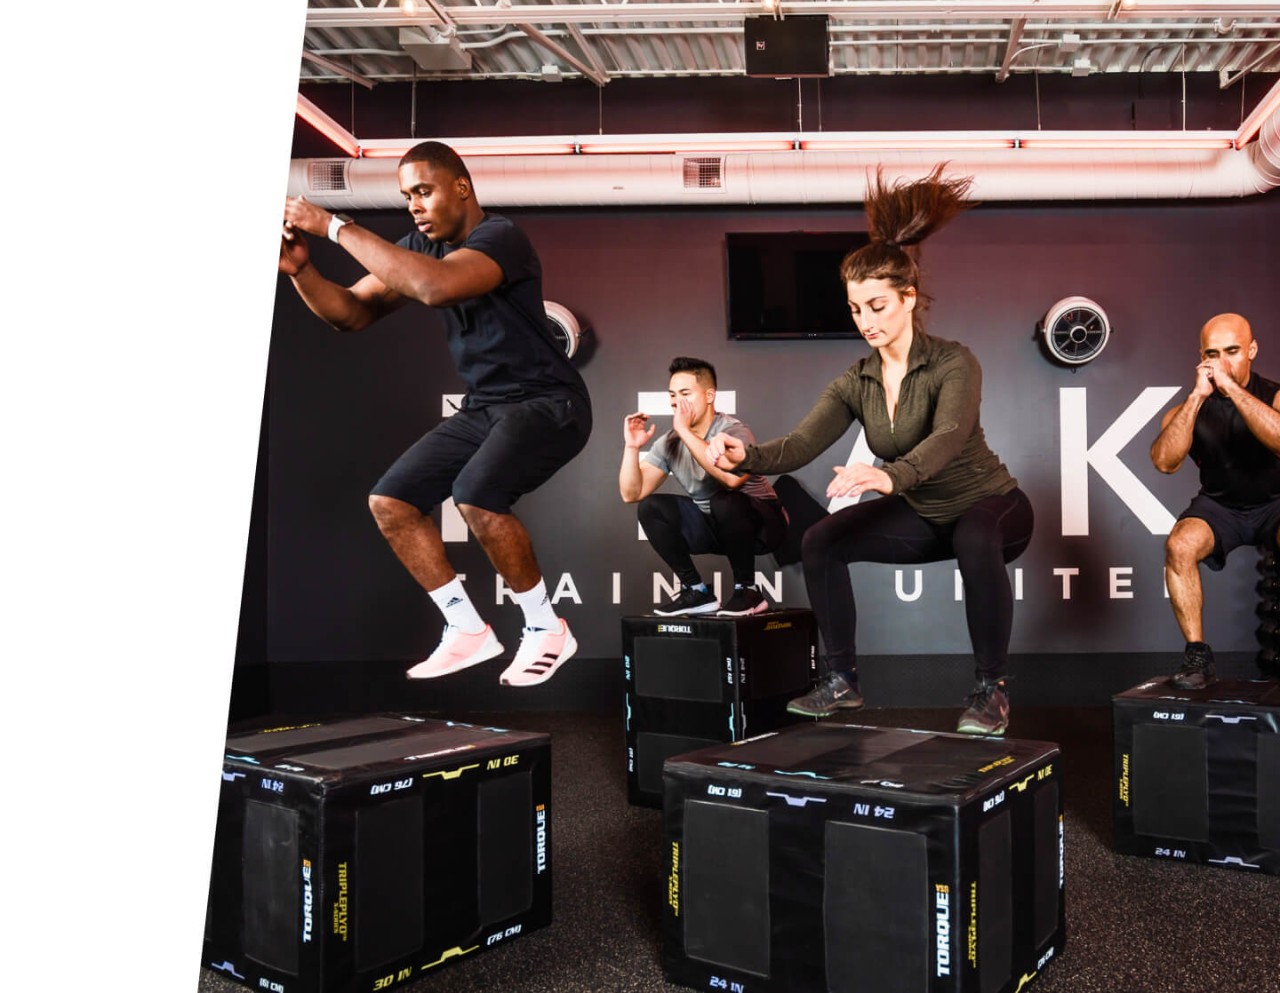 Four people doing box jumps onto black boxes in PEAK training space